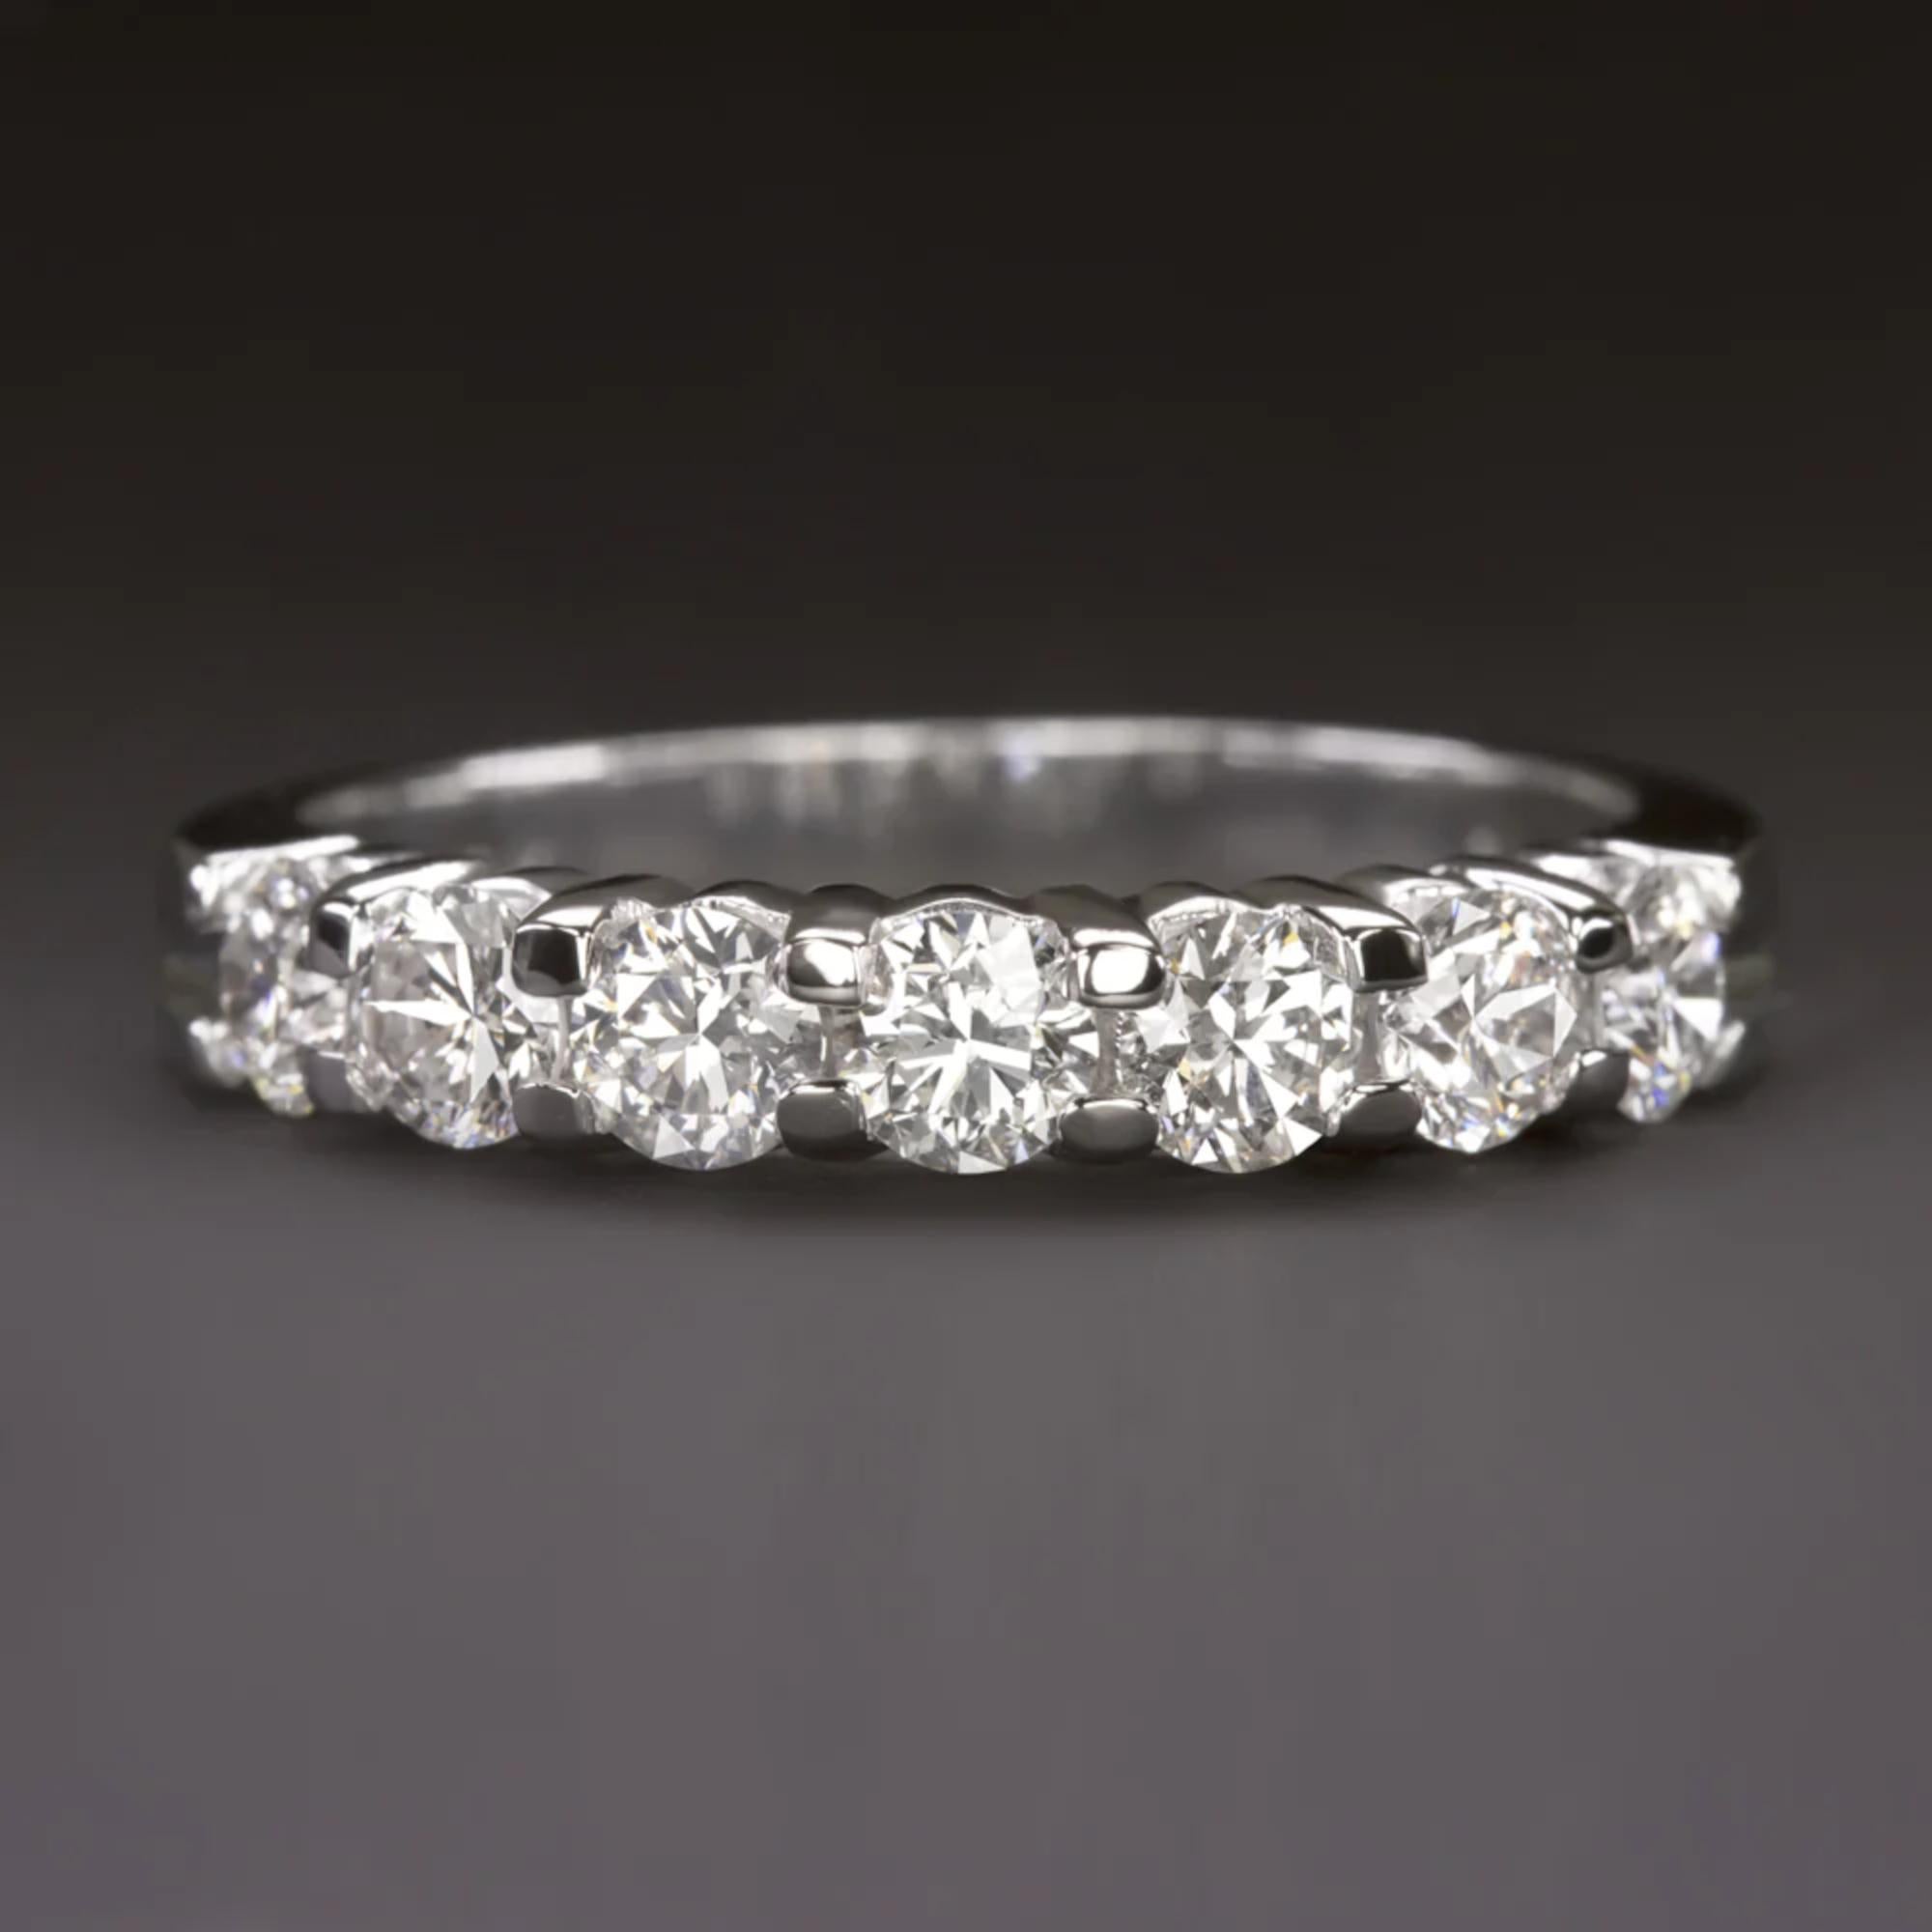 This diamond band has a classic design with 1 carat of high quality excellent cut diamonds across the face! It is a great choice for a wedding band or a stand alone piece.

Color E-F
Clarity VS2-SI1
Carat Weight 1 Carat